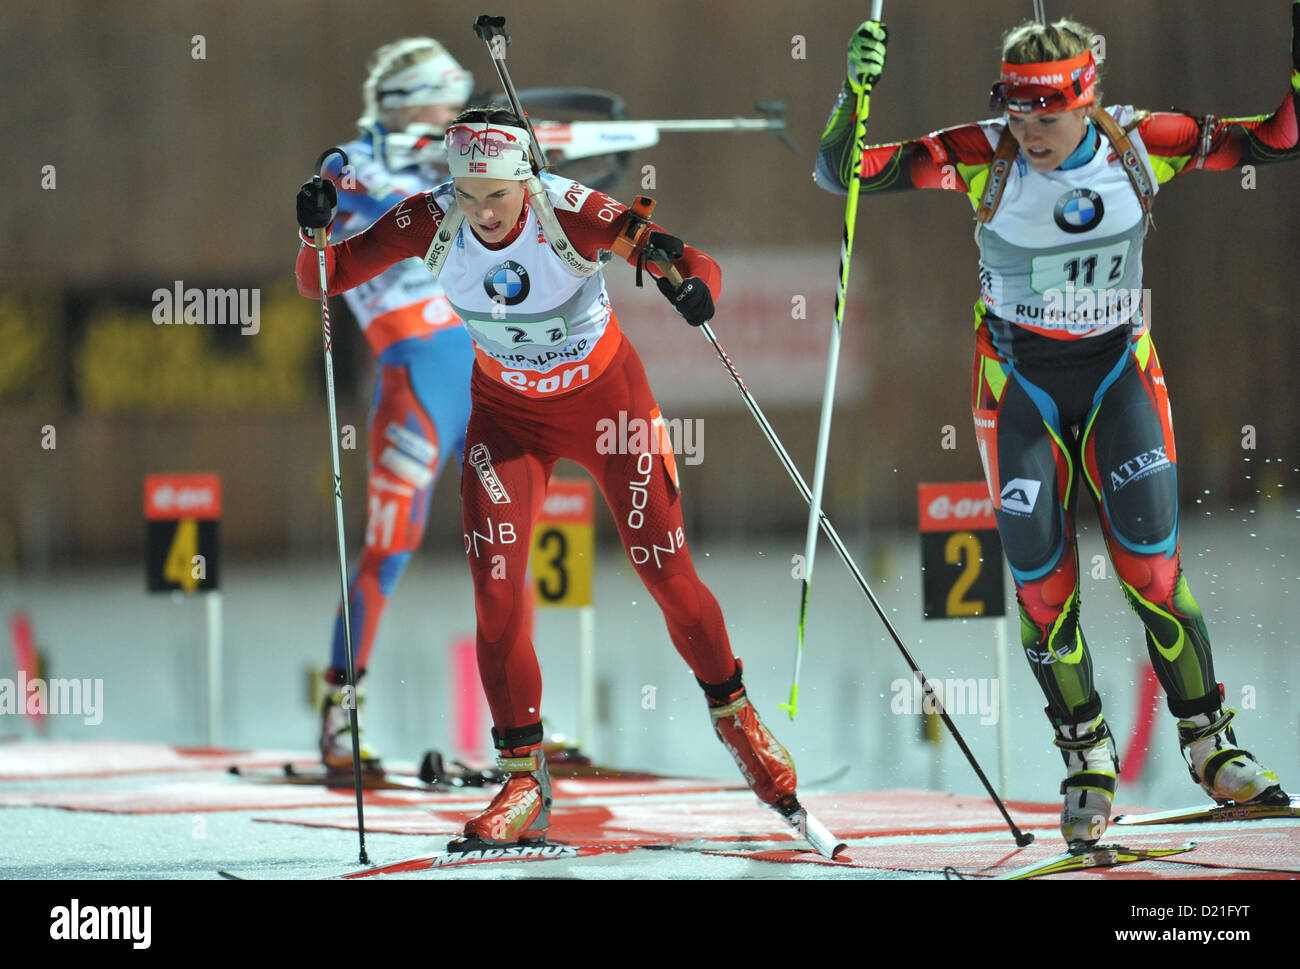 Norwegian biathlete Ann Kristin Aefedt (L) and Czech biathlete Gabriela Soukalova leave the shooting range during the women's relay event at the biathlon world cup at Chiemgau Arena in Ruhpolding, Germany, 09 January 2013. Photo: ANDREAS GEBERT Stock Photo